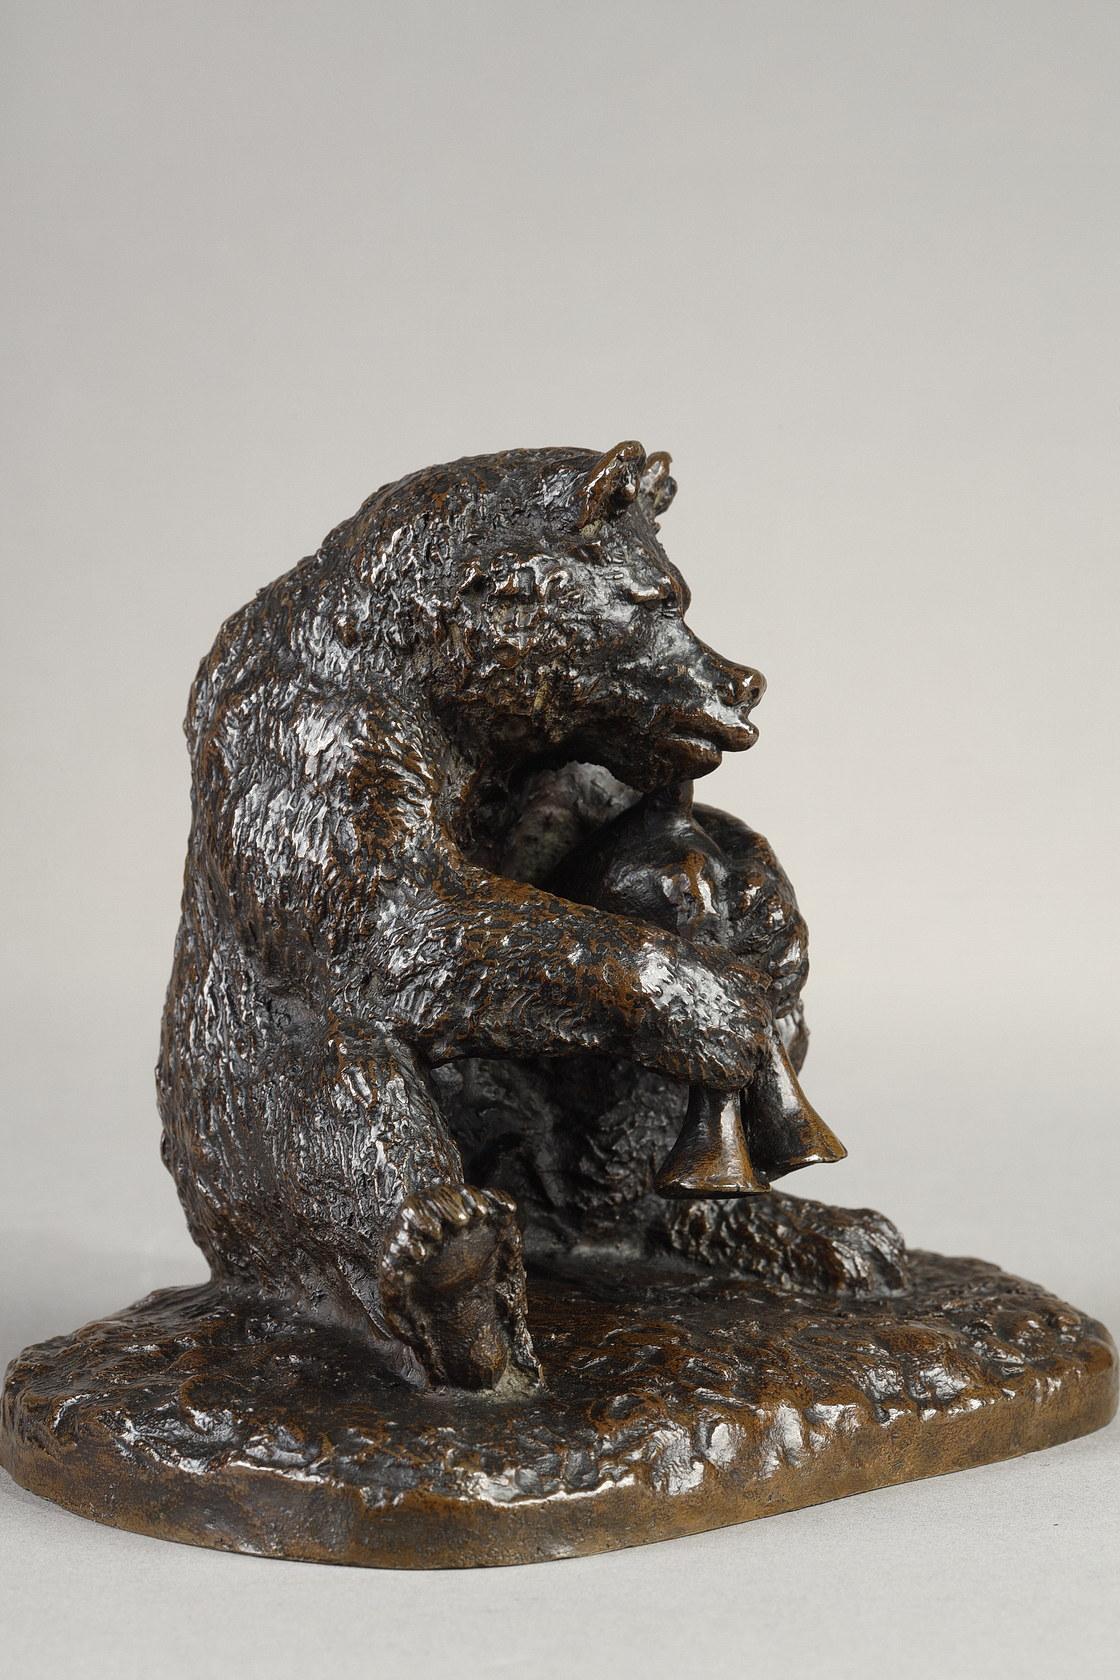 Bear Bagpiper
by Christophe FRATIN (1801-1864)

Bronze with nuanced dark brown patina
Signed on the base 